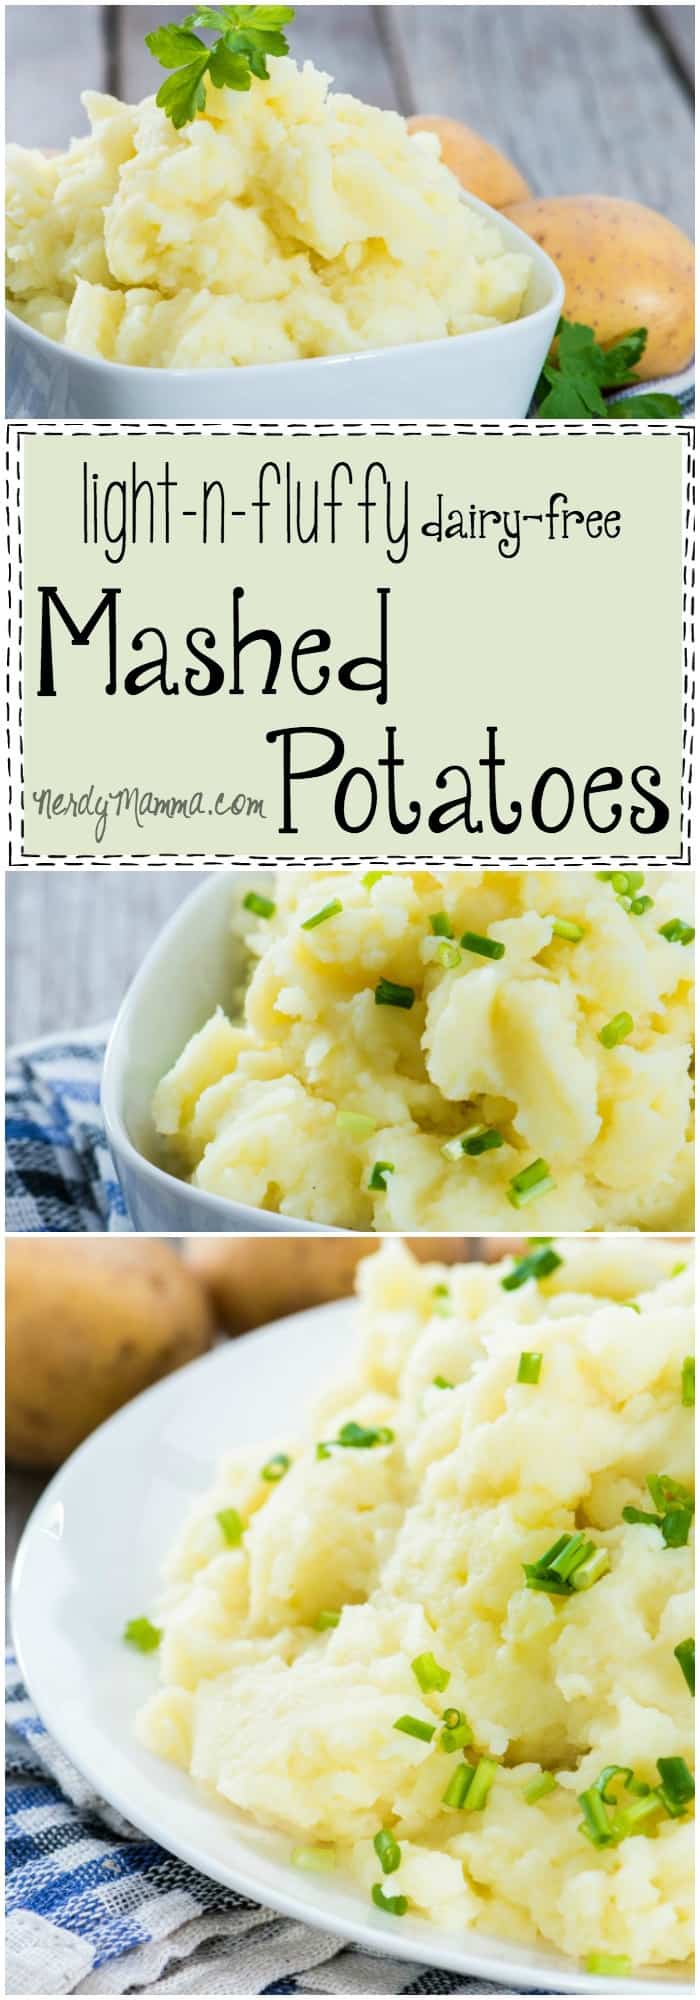 This recipe for light and fluffy dairy-free mashed potatoes sounds so awesome! I love the one simple ingredient that turns plain potatoes into awesome!